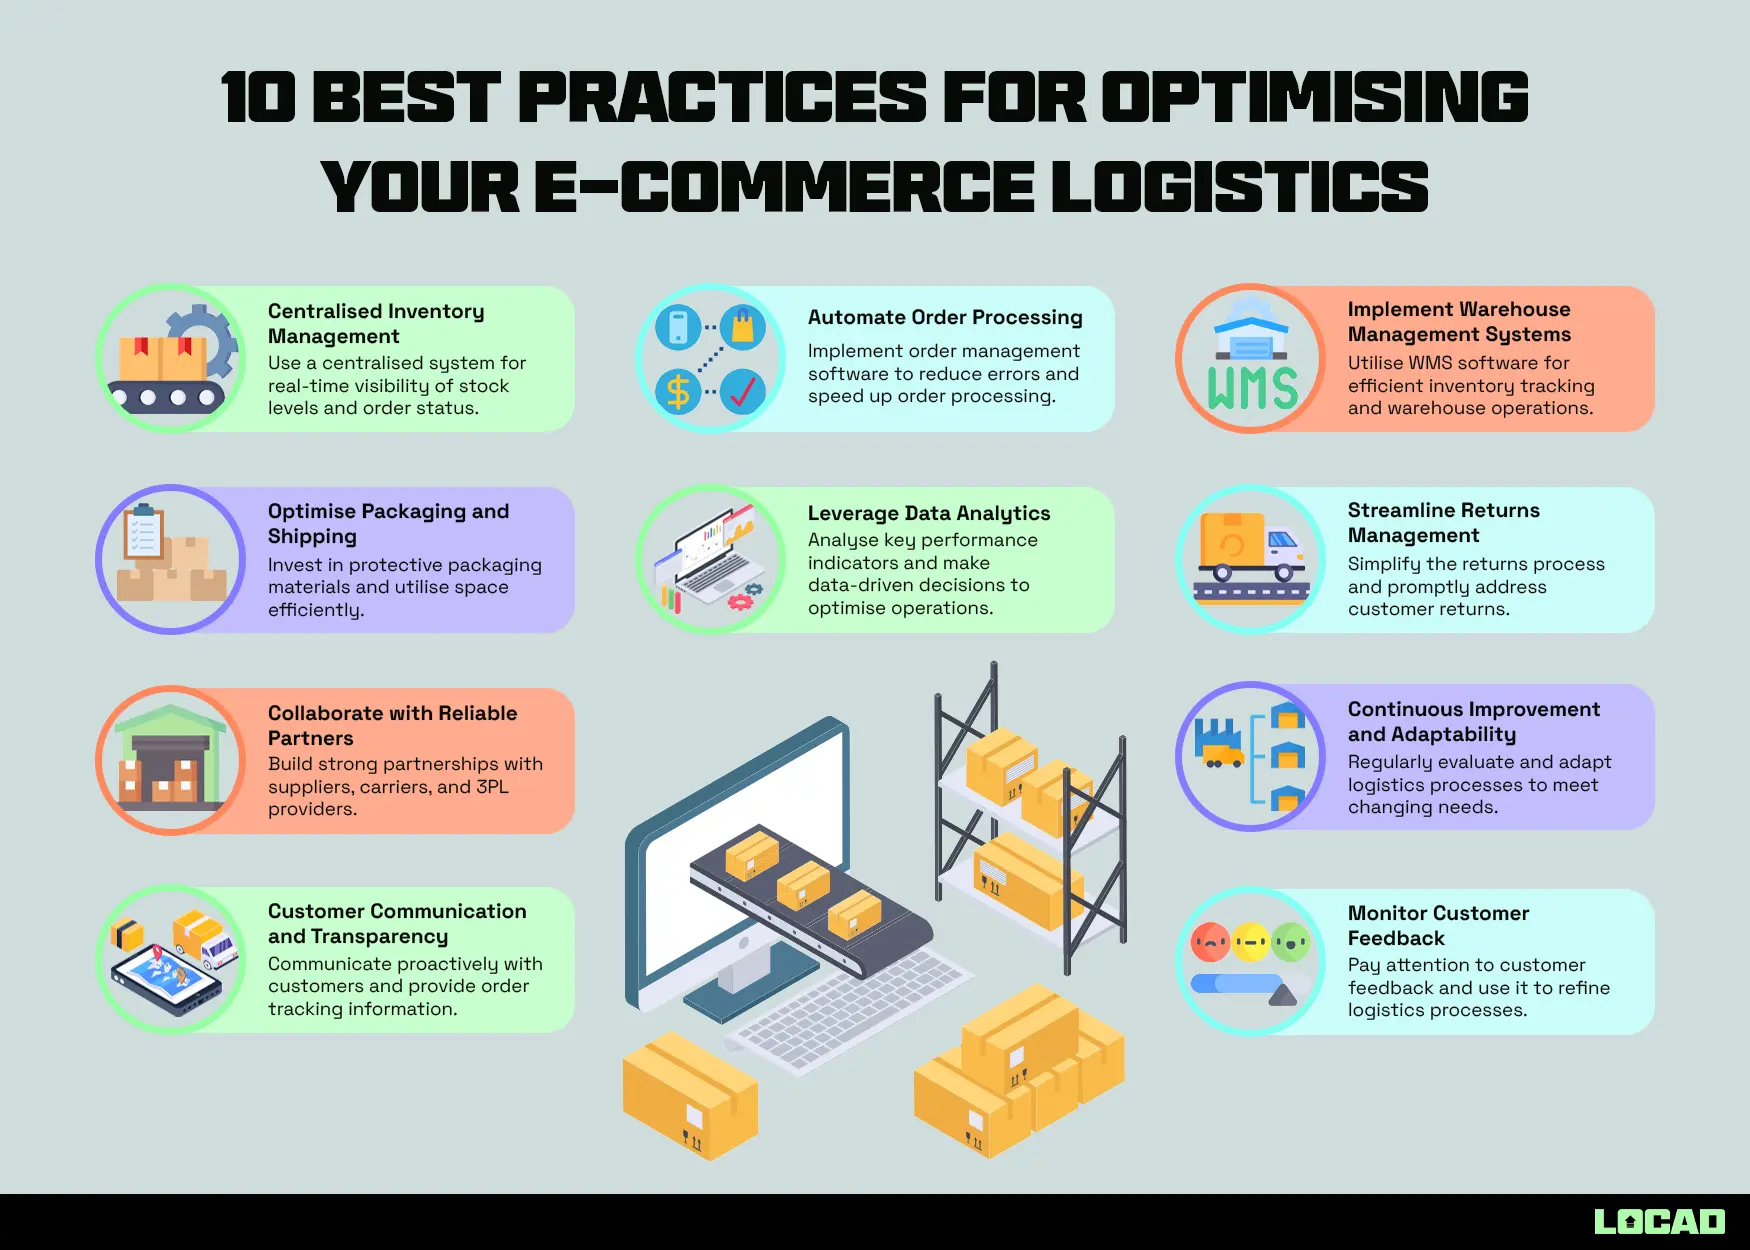 10 Best Practices for Optimising Your E-commerce Logistics